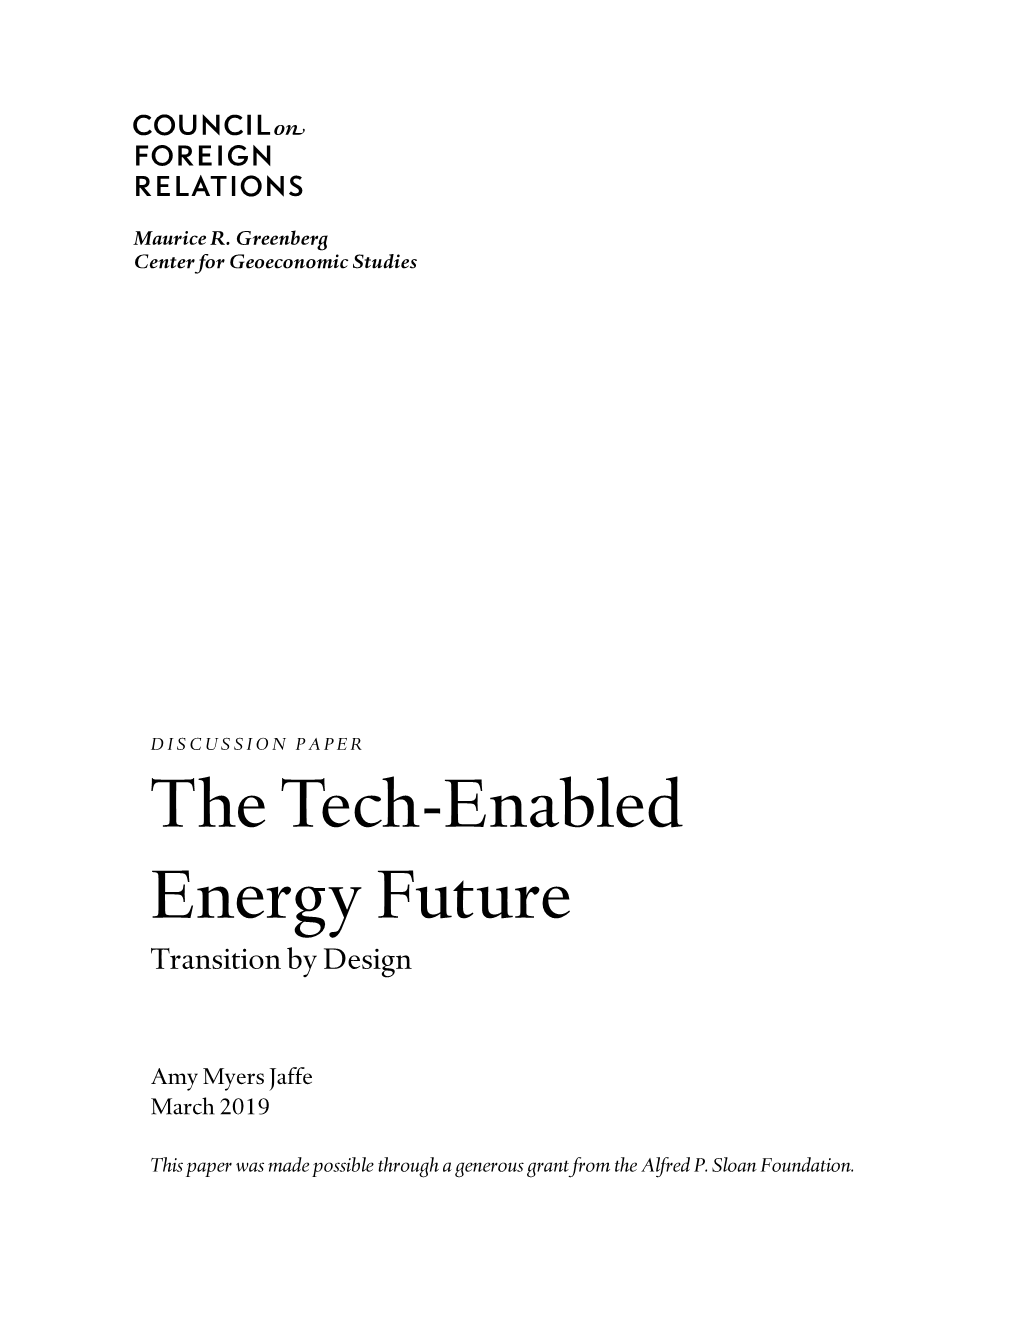 The Tech-Enabled Energy Future Transition by Design